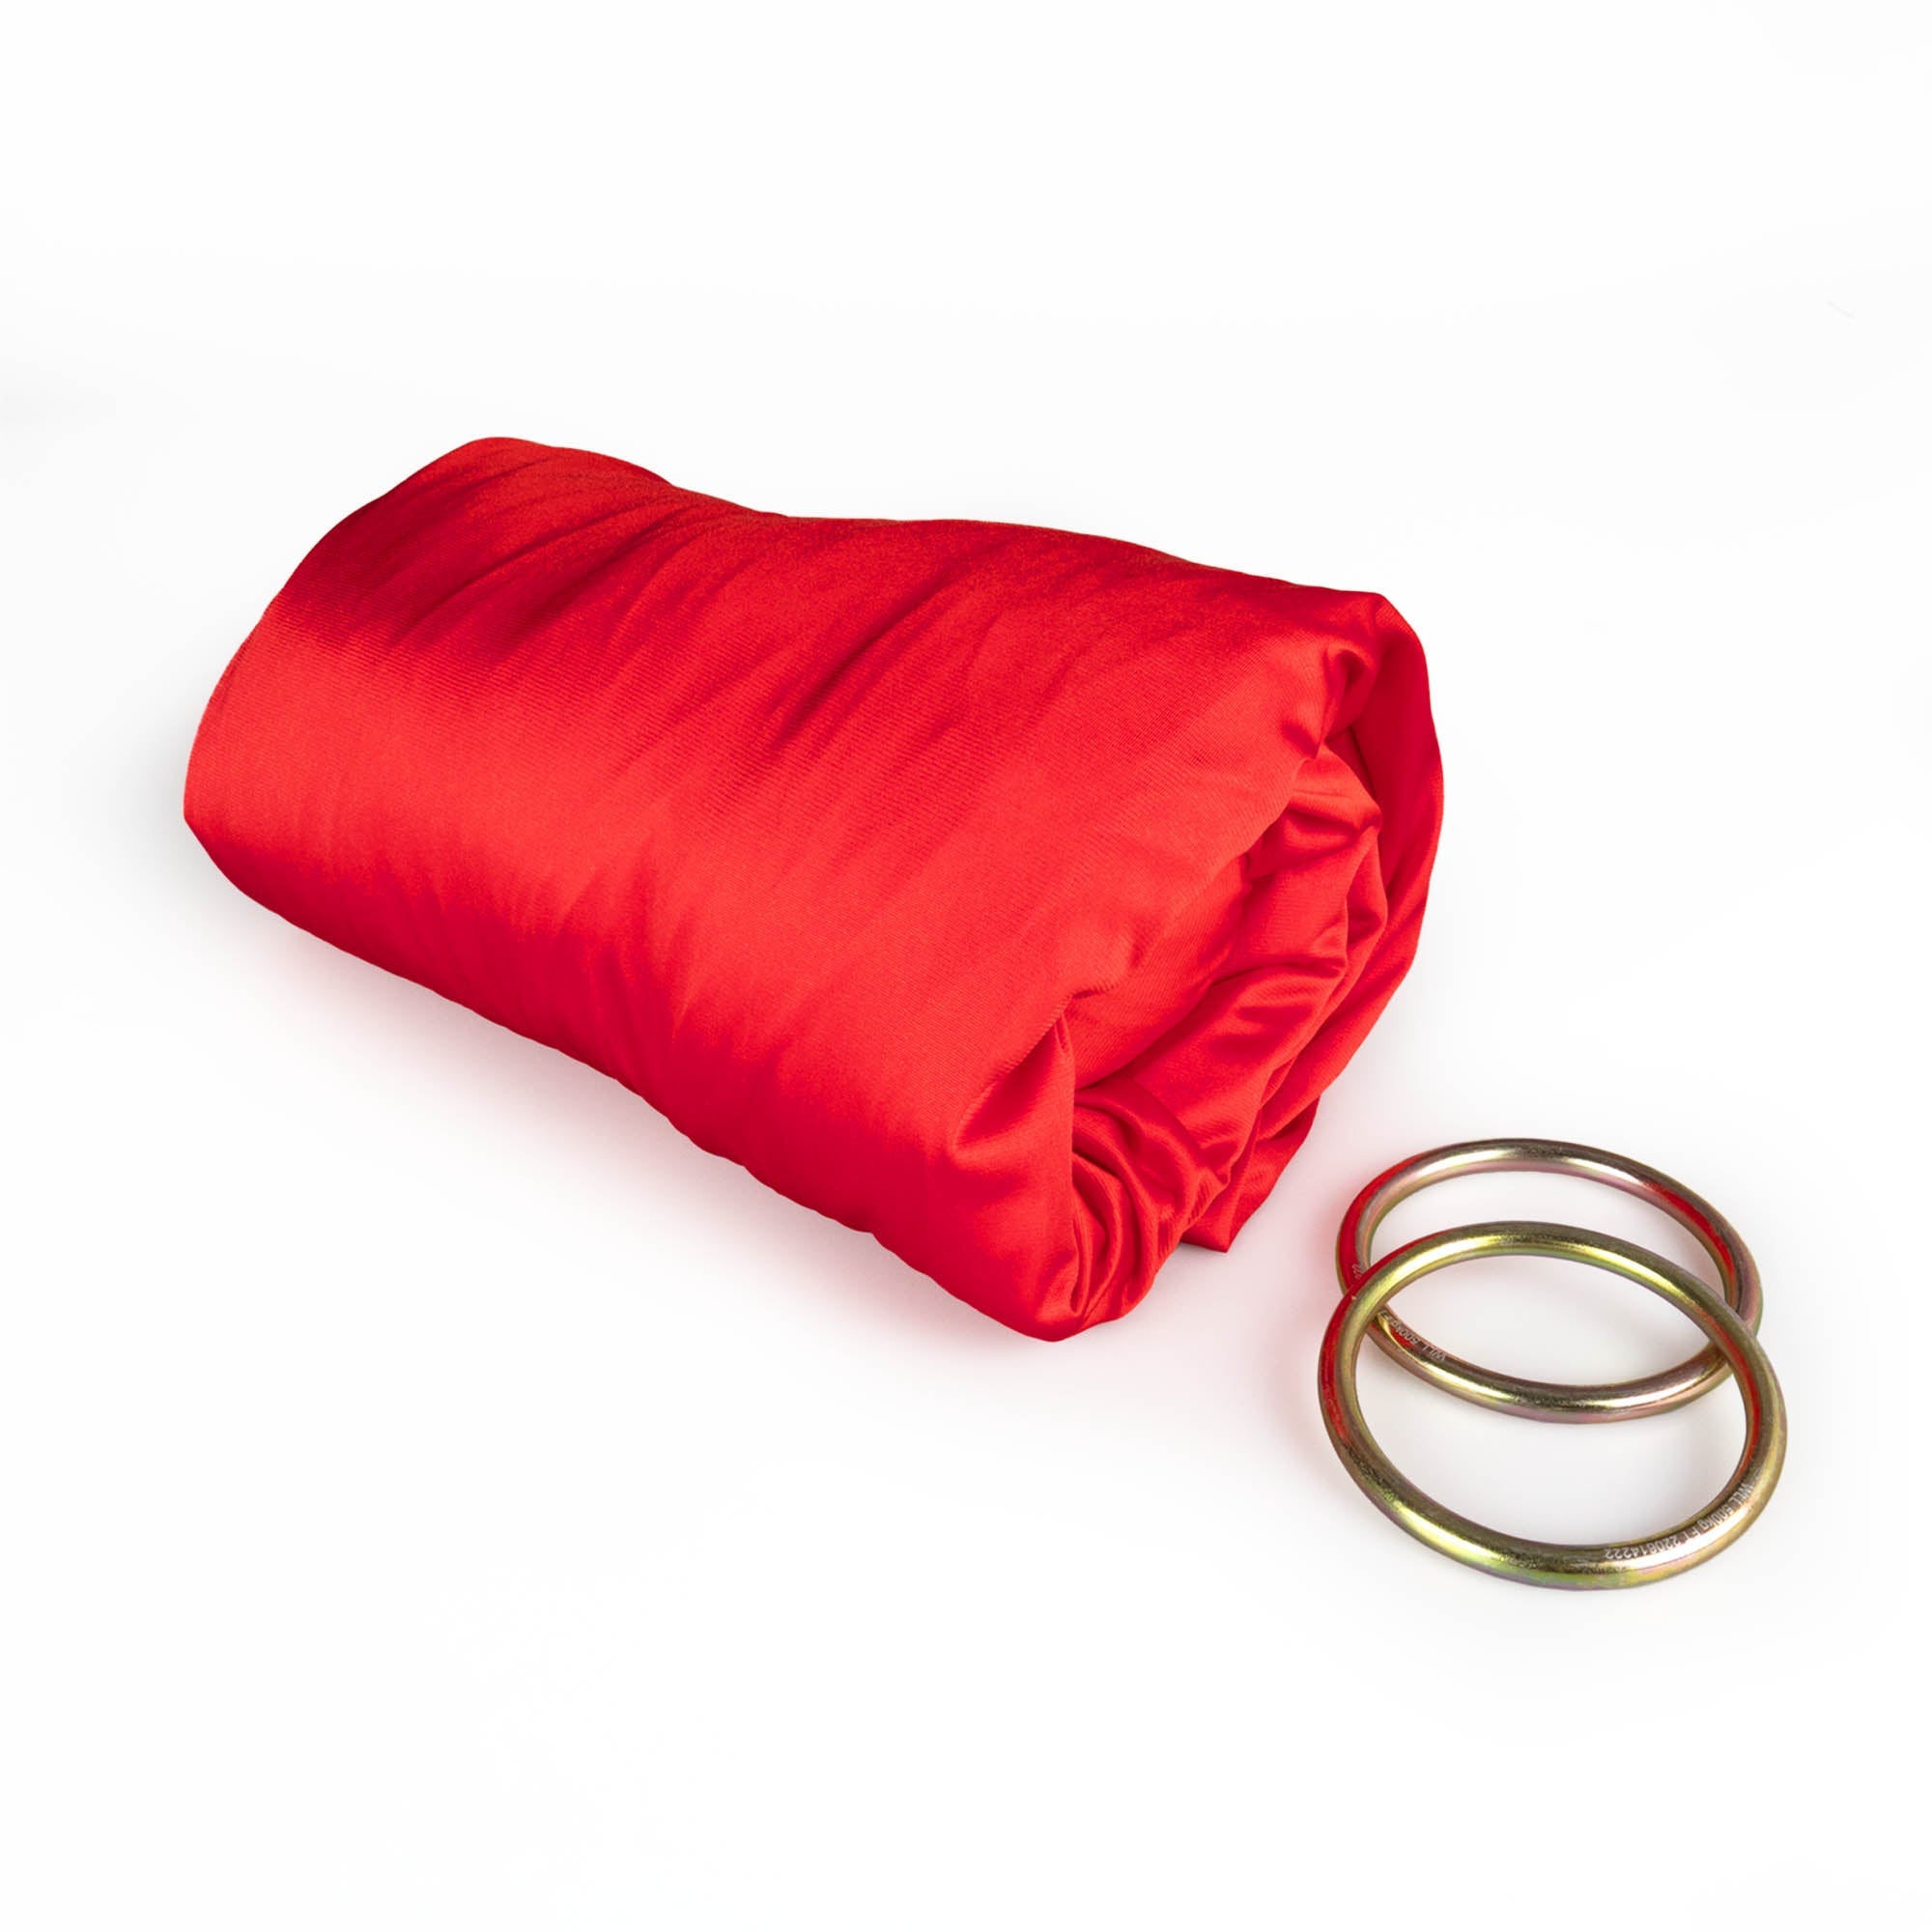 Red yoga hammock rolled up with rings detached